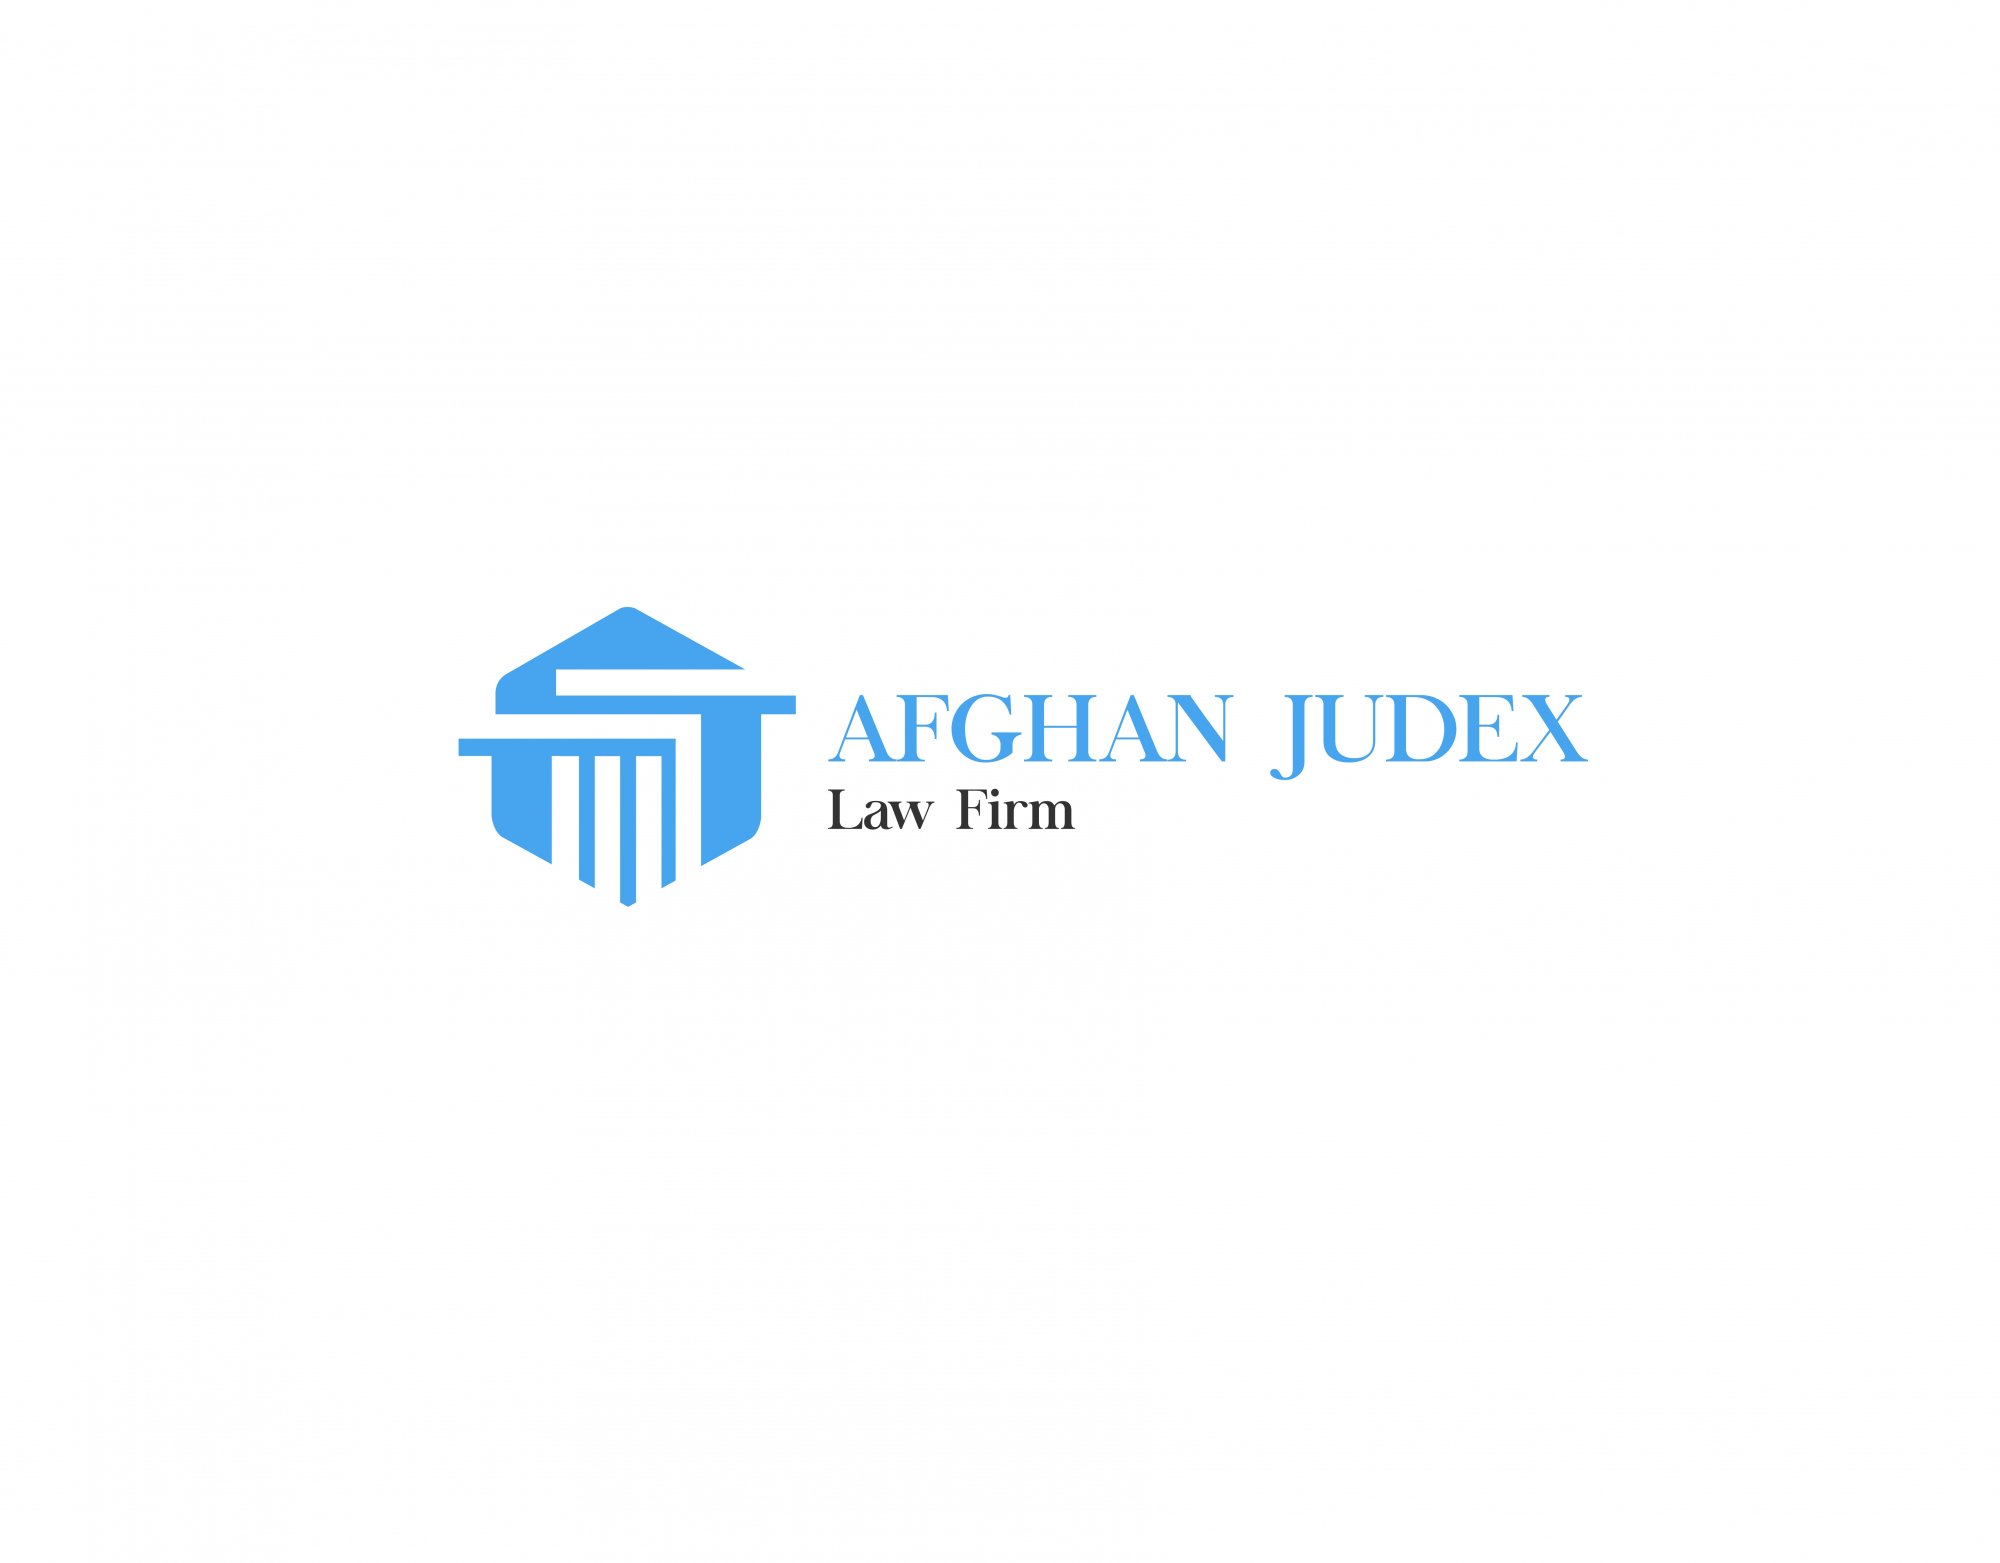 Afghan Judex cover photo